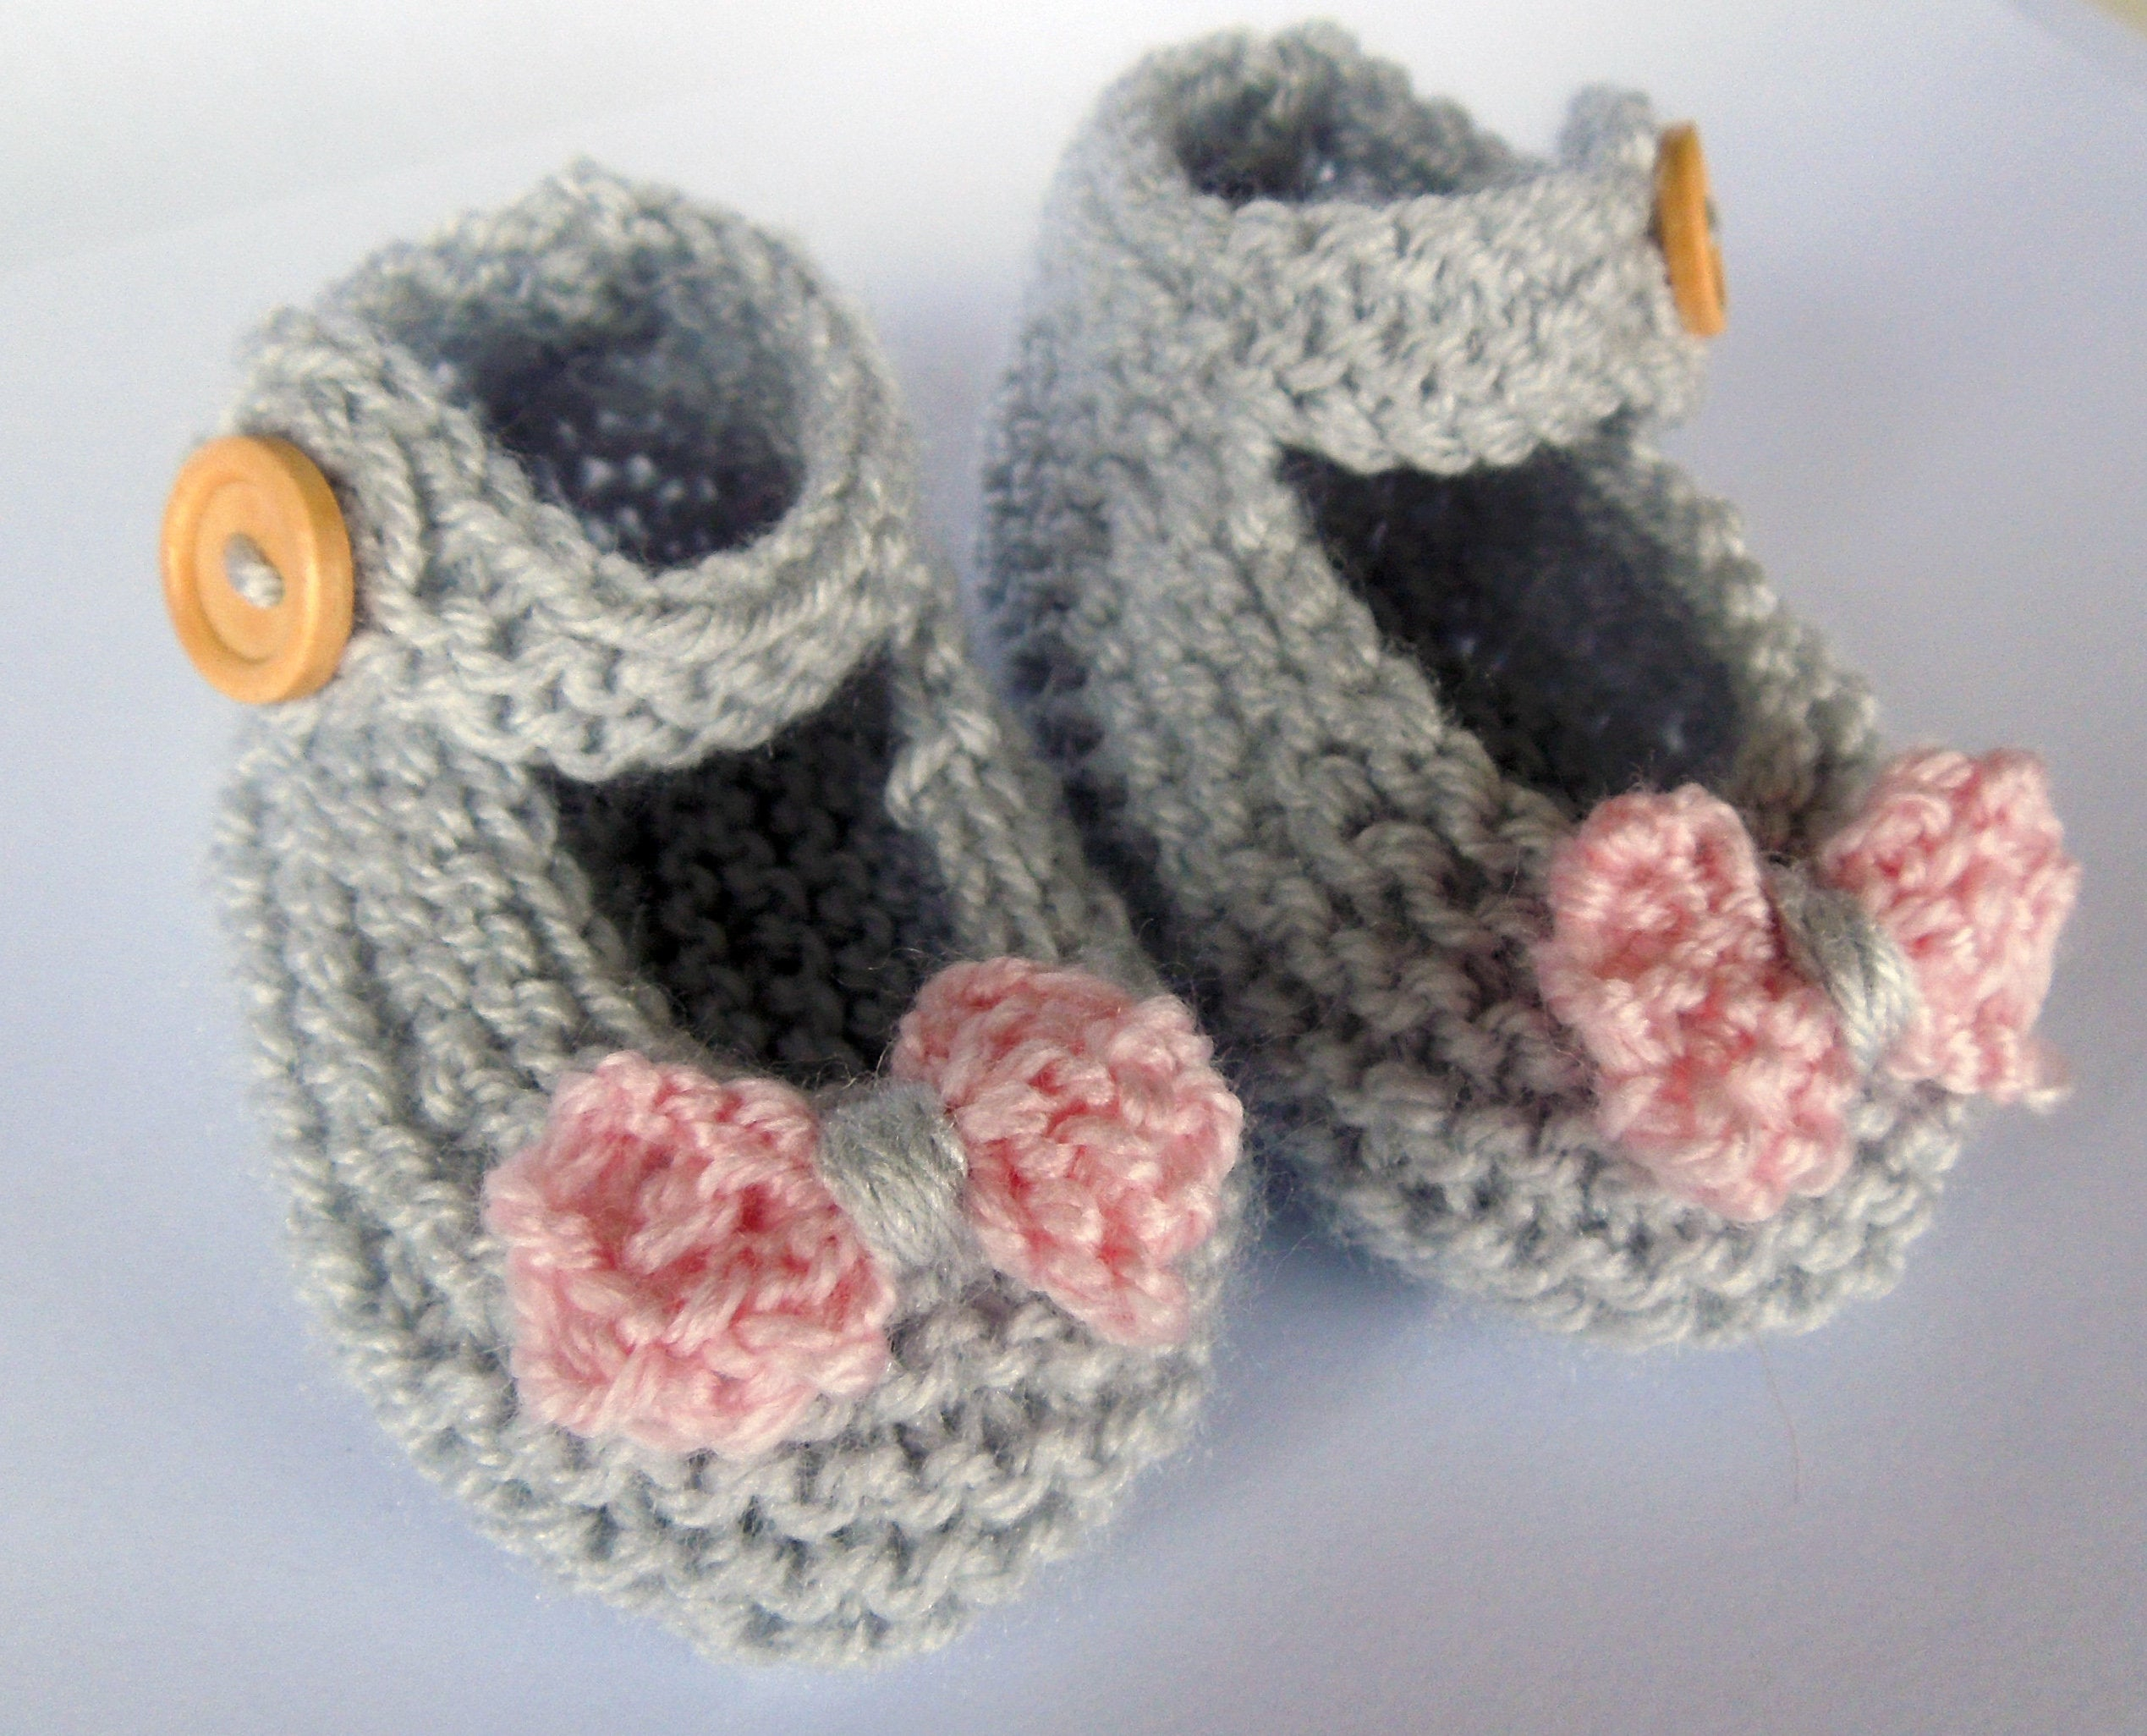 Knitting Patterns For Baby Booties Mary Jane Ba Shoes Ba Booties Knitting Pattern Ba Shoes Girl Ba Girl Booties Mary Jane Ba Booties Ba Shower Giftmary Janes